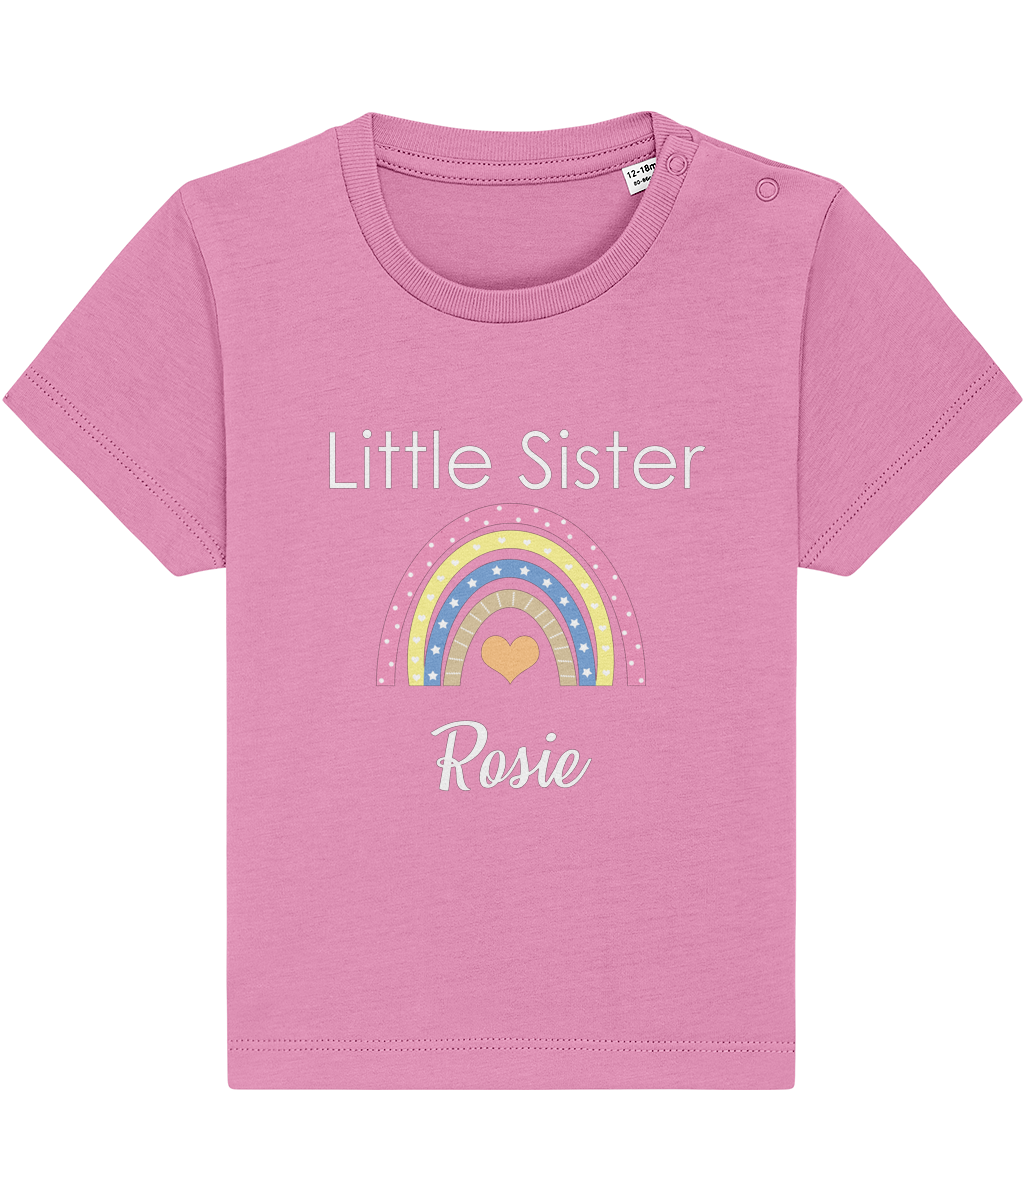 Little Sister T-Shirt (small sizes)